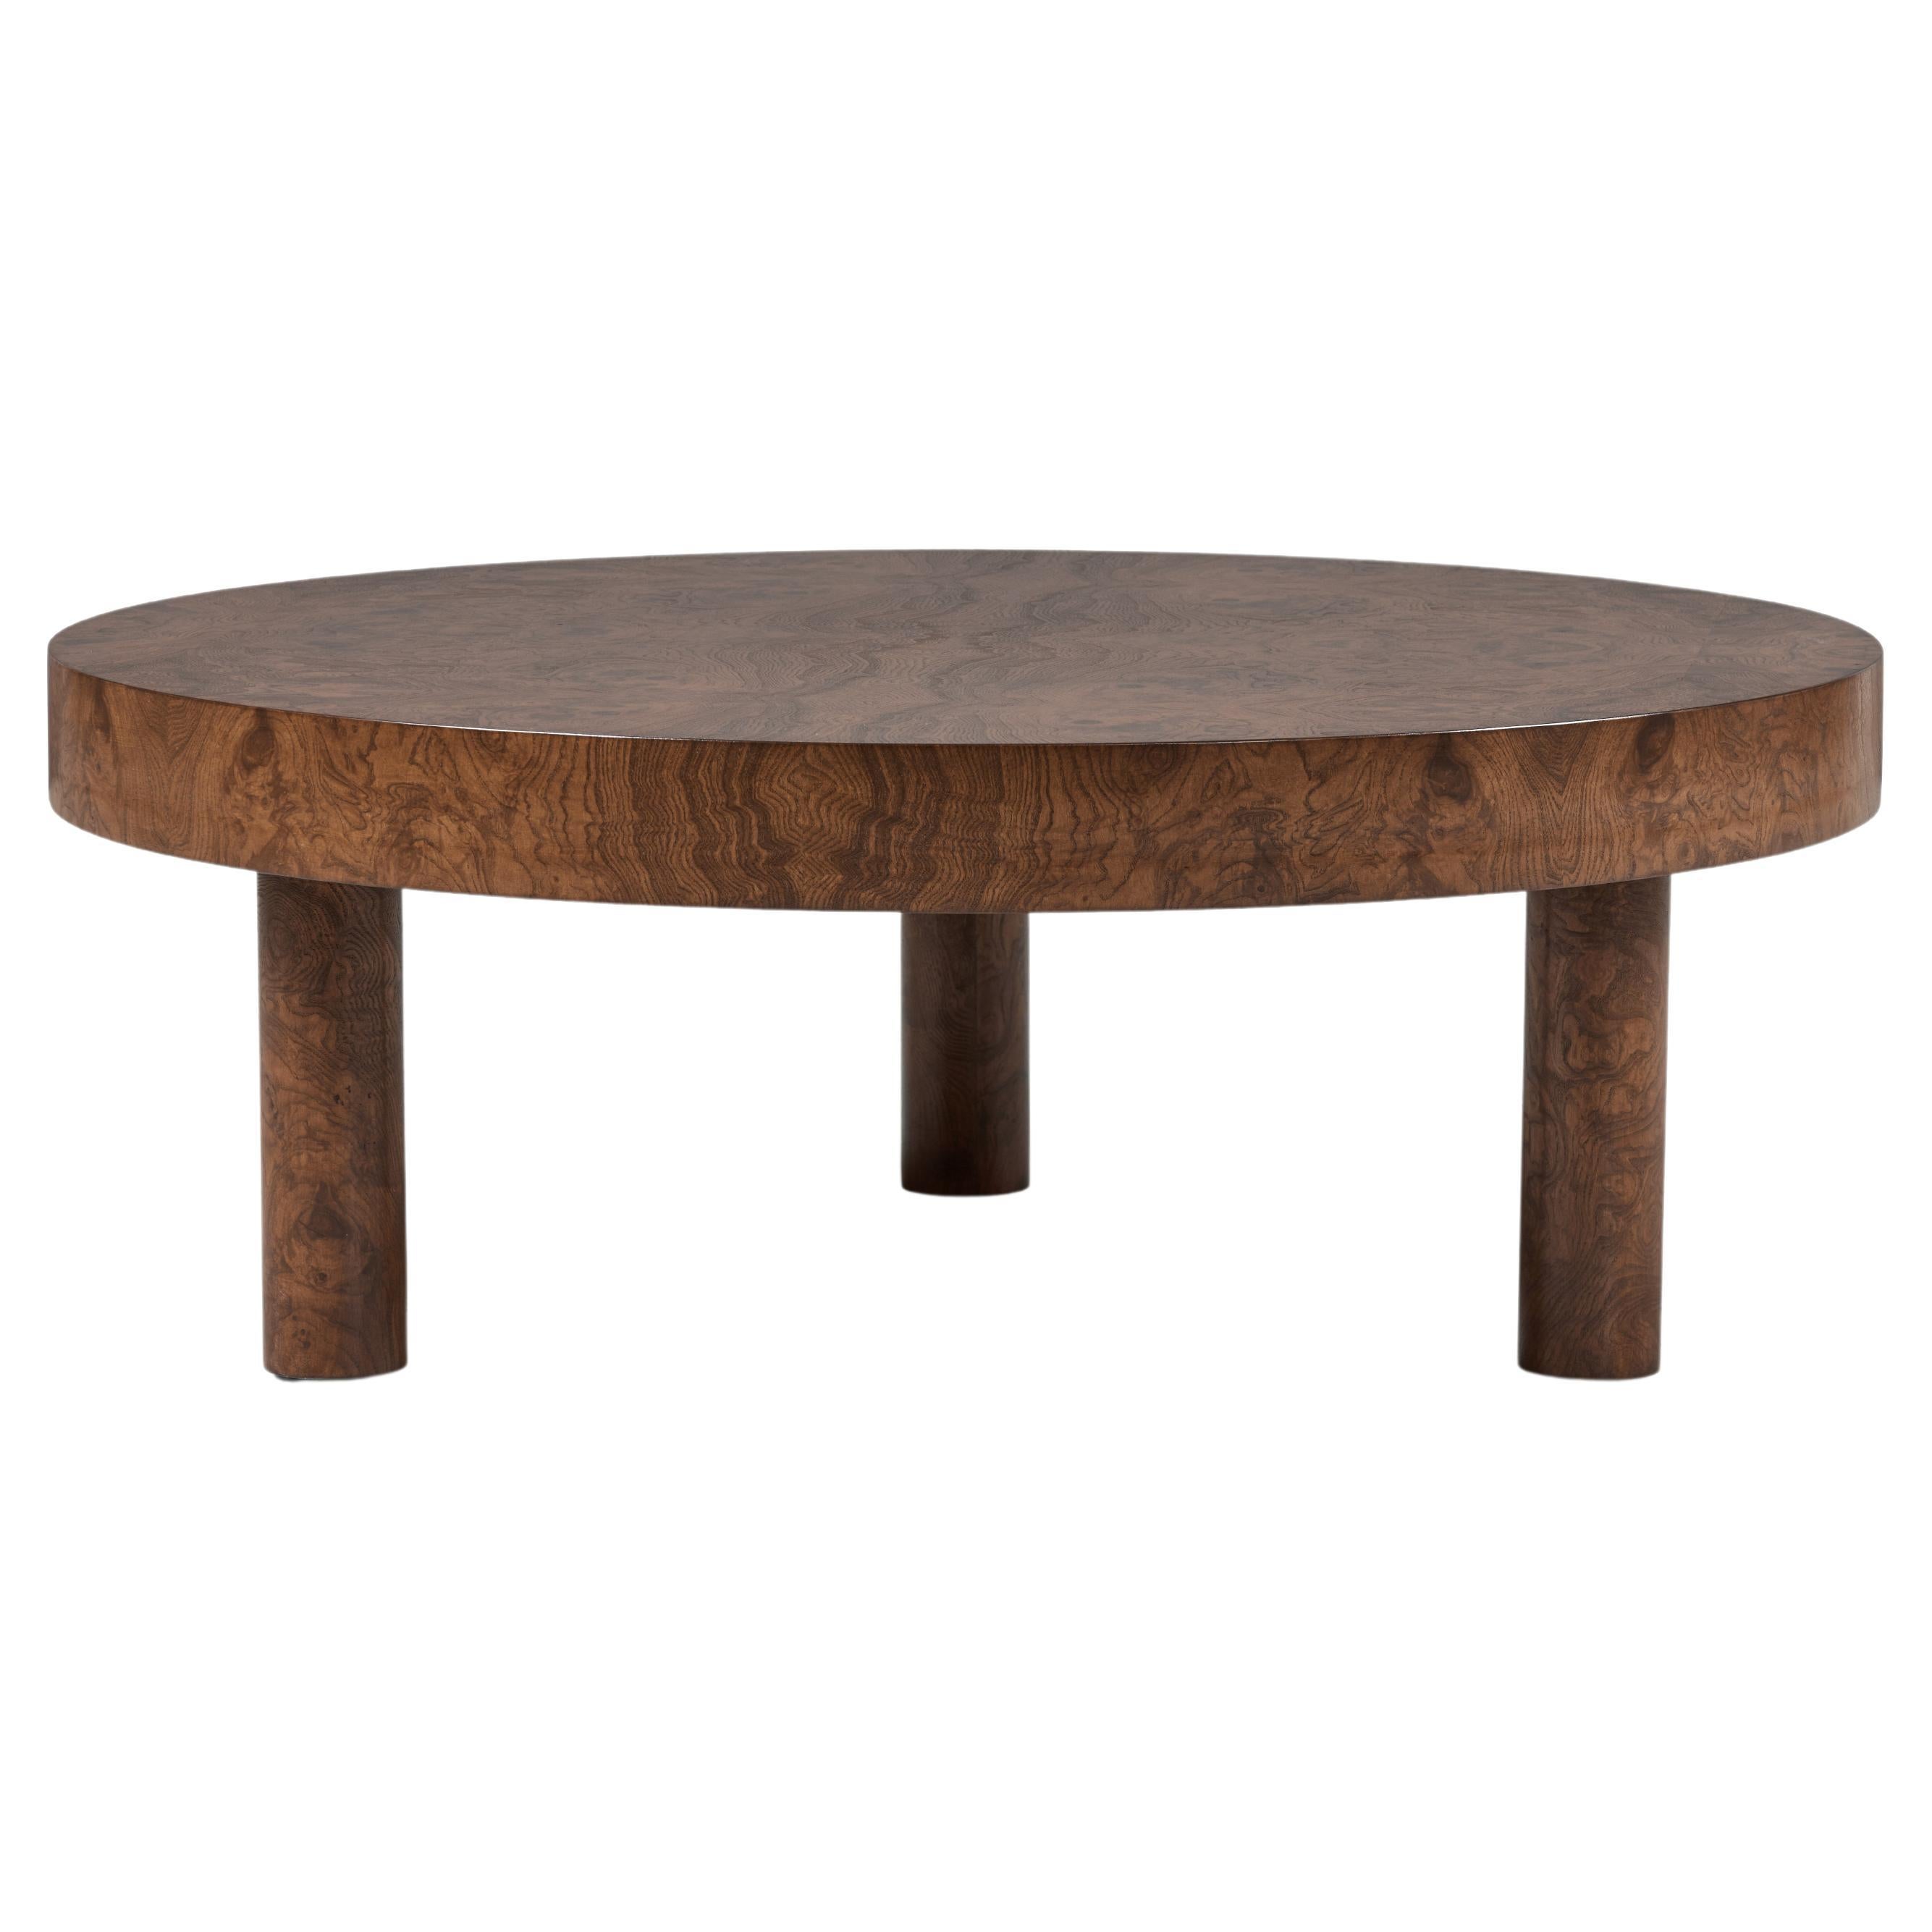 Carlton Coffee Table 40" DIA, in Vintage Burl Wood Finish, by August Abode